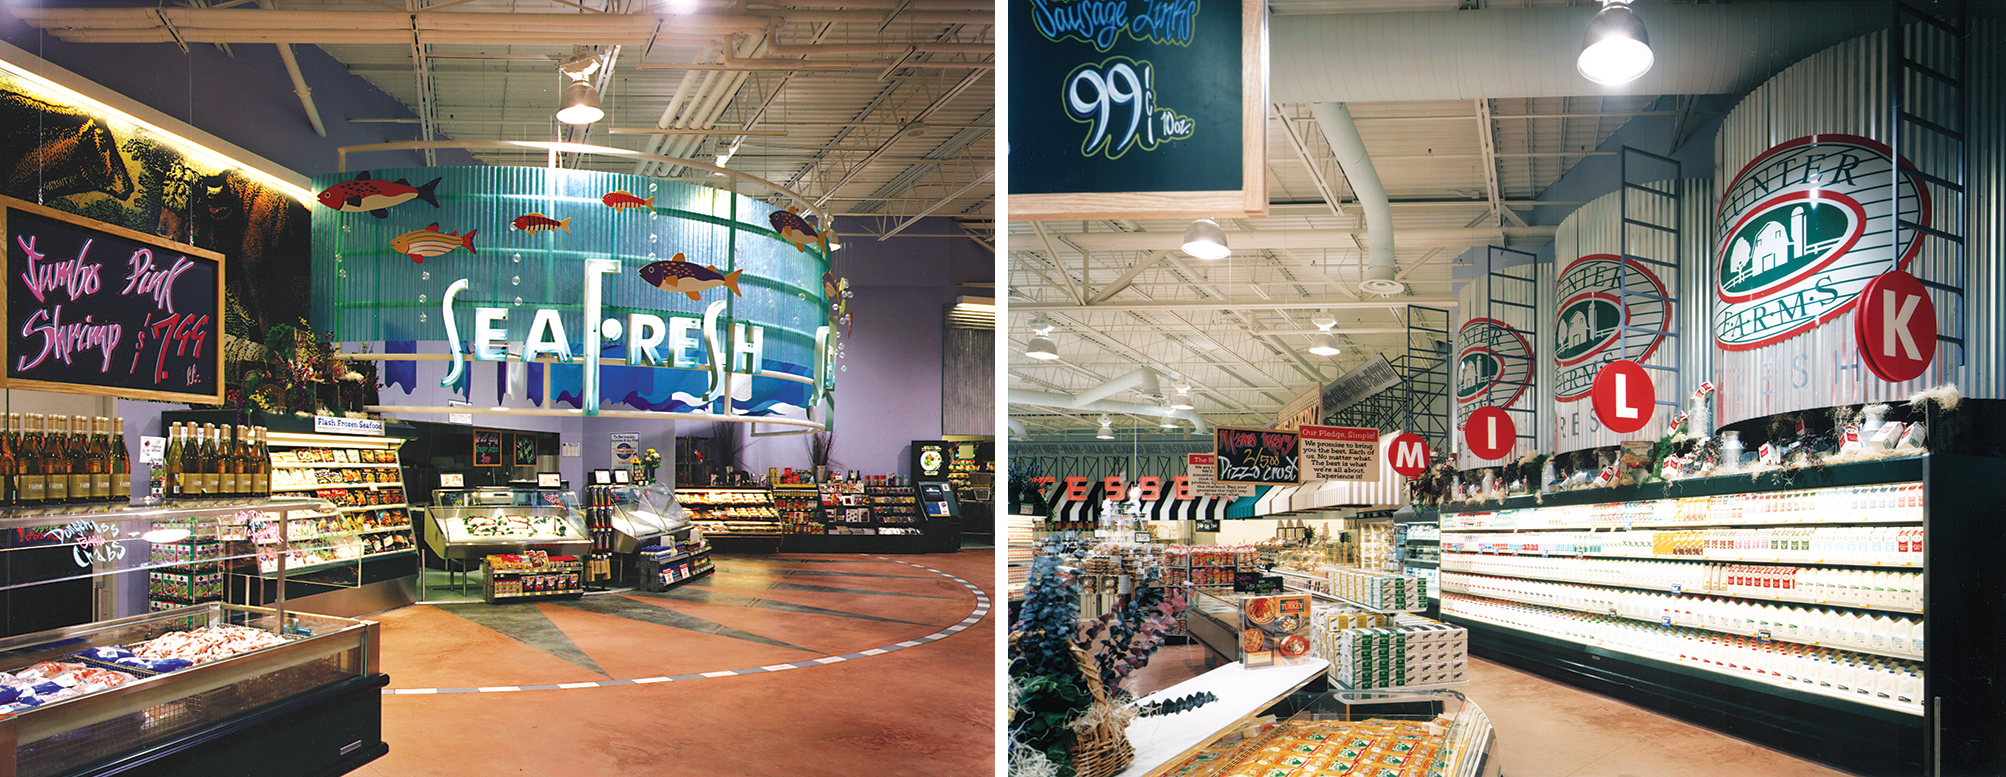 Archival photos of Harris Teeter supermarkets redesigned by Shook Kelley in the 1990s (April 2019)